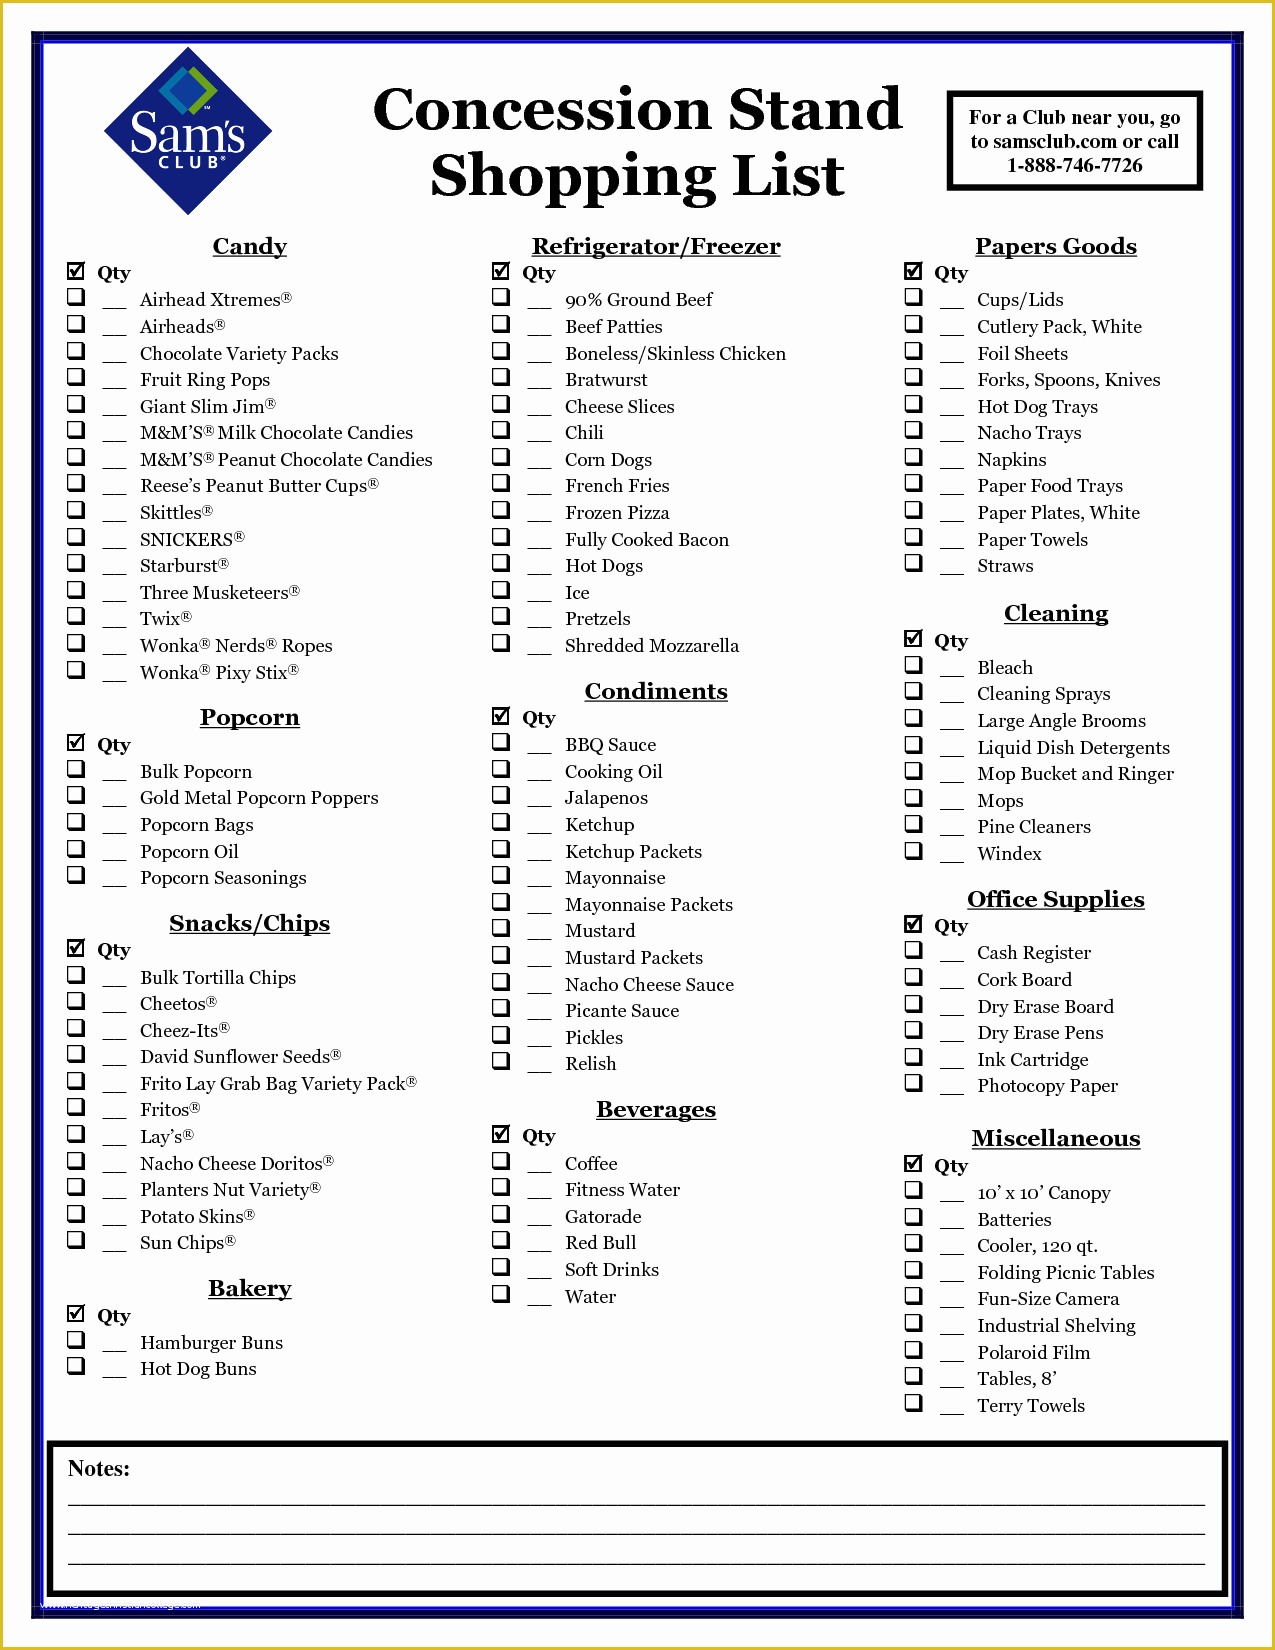 Concession Stand Menu Template Free Of Shopping List … Concession Stand Pinterest